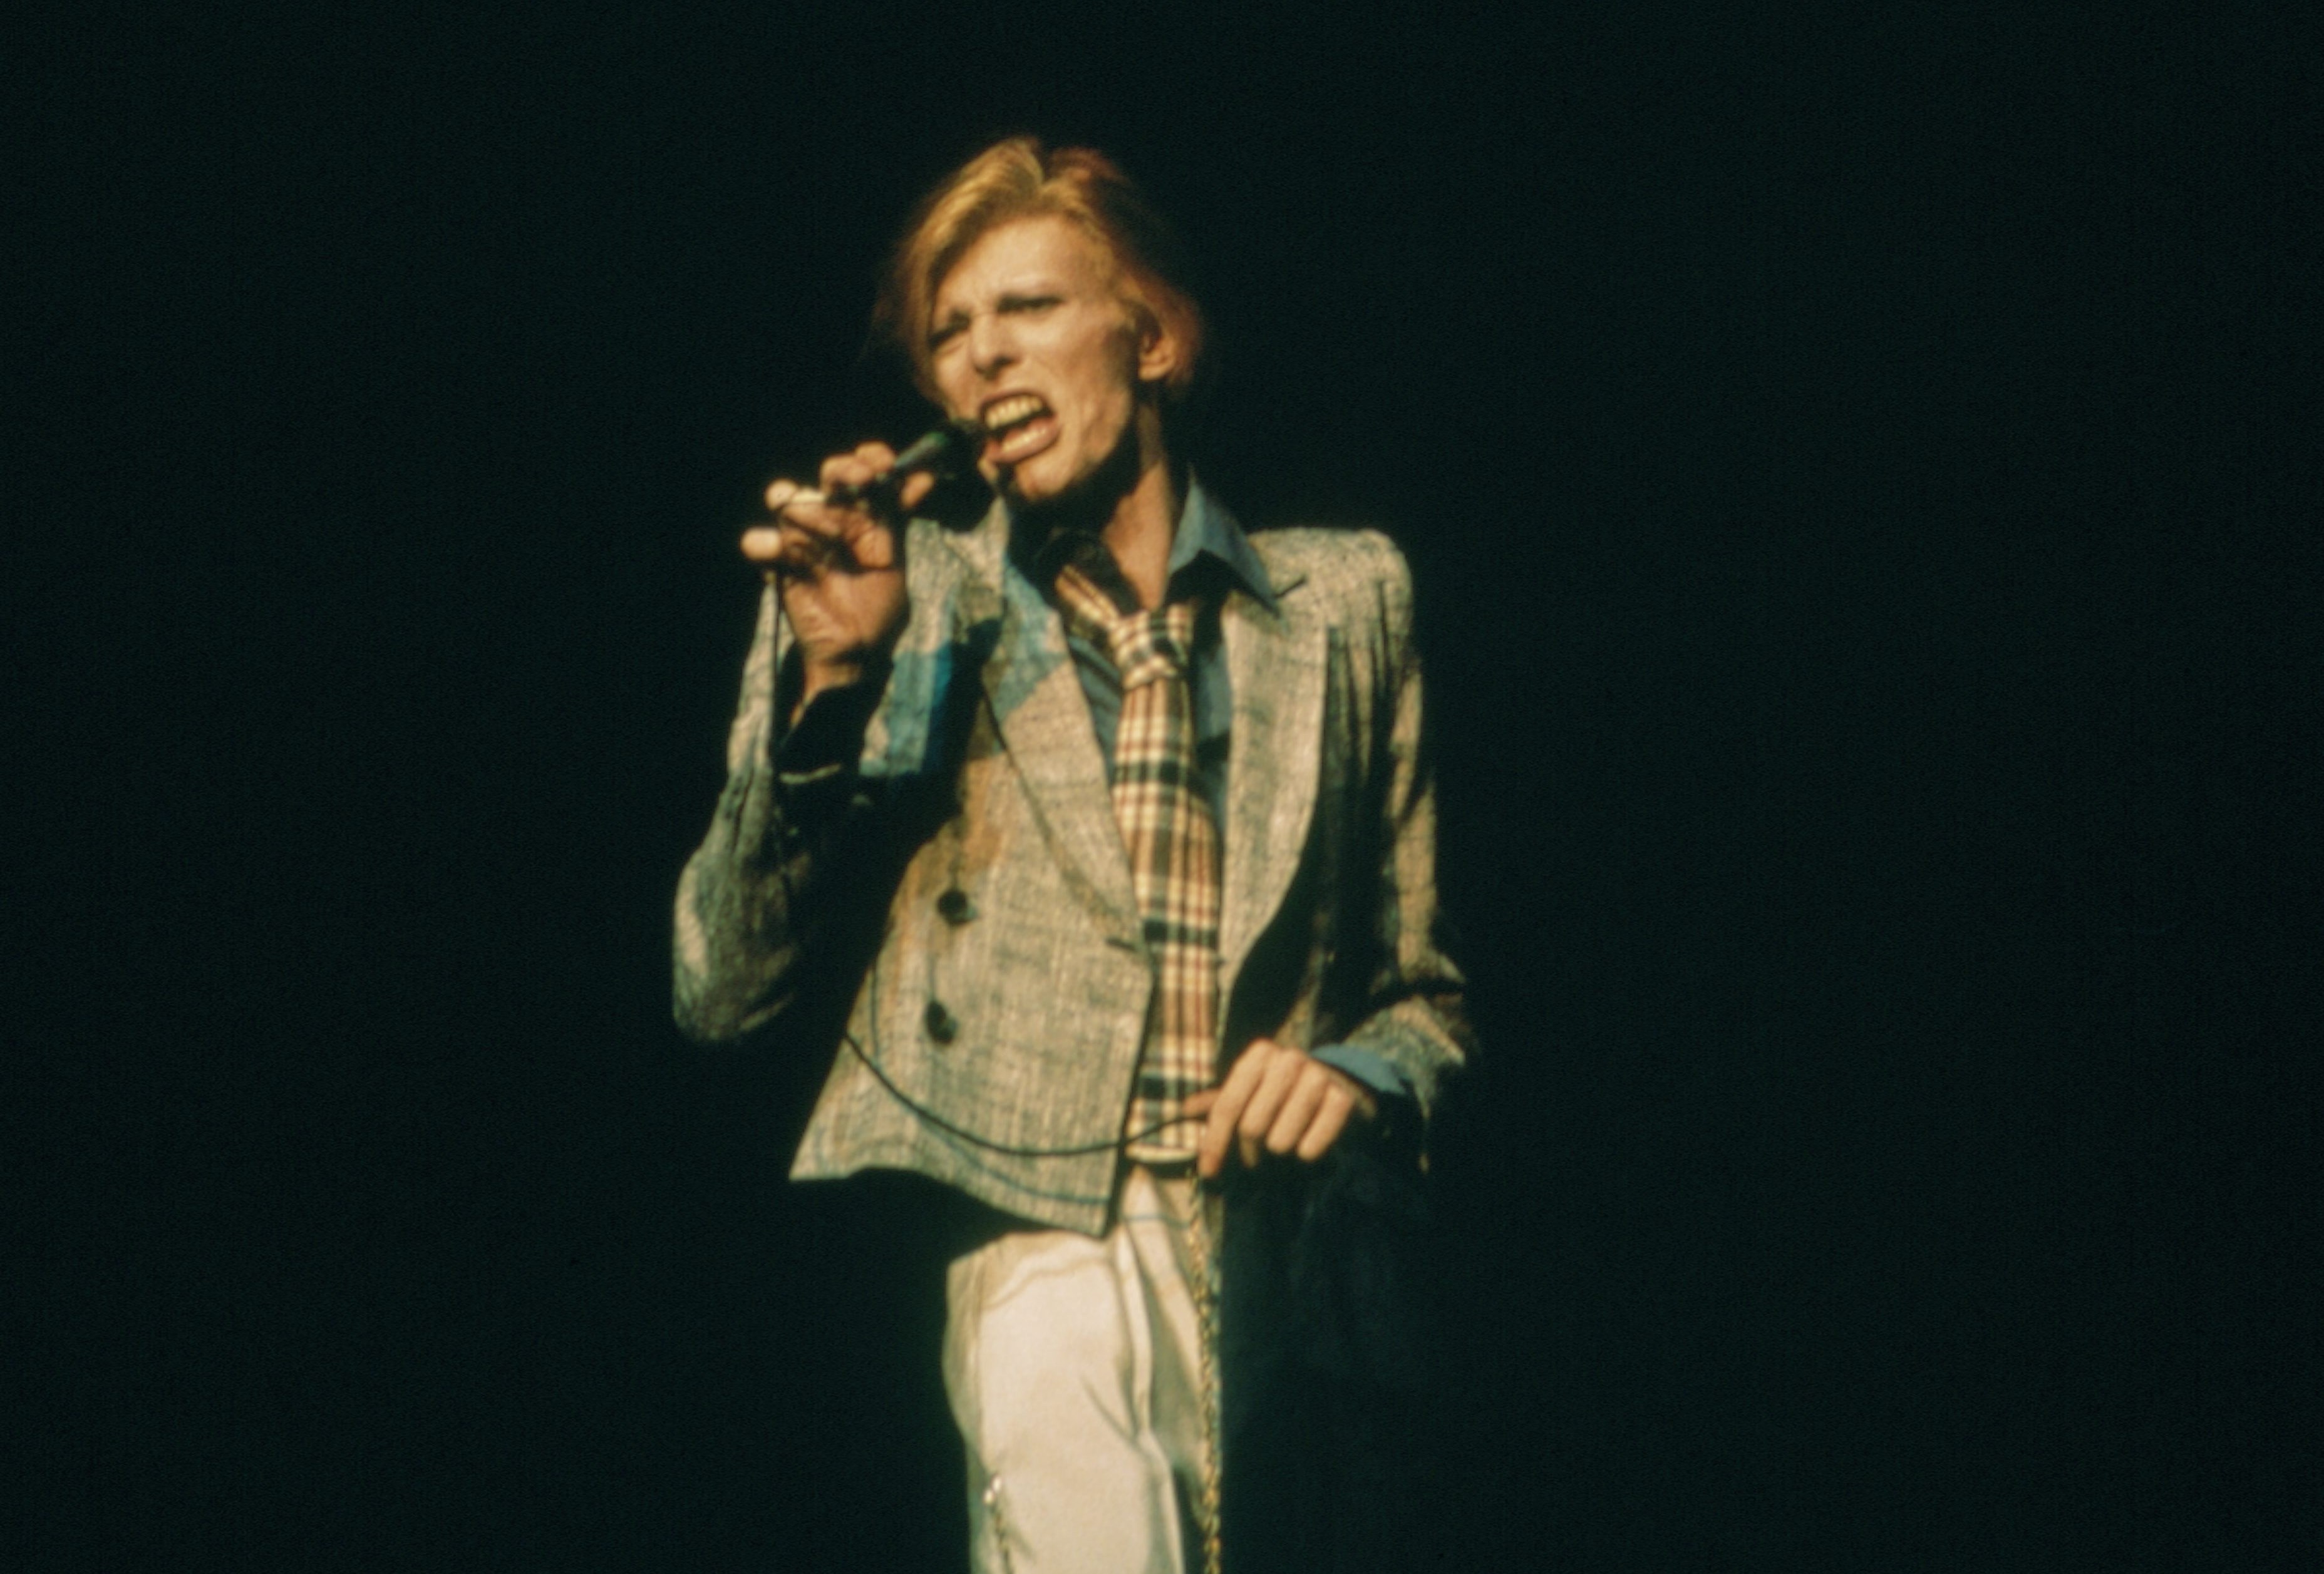 Archive photo of David Bowie